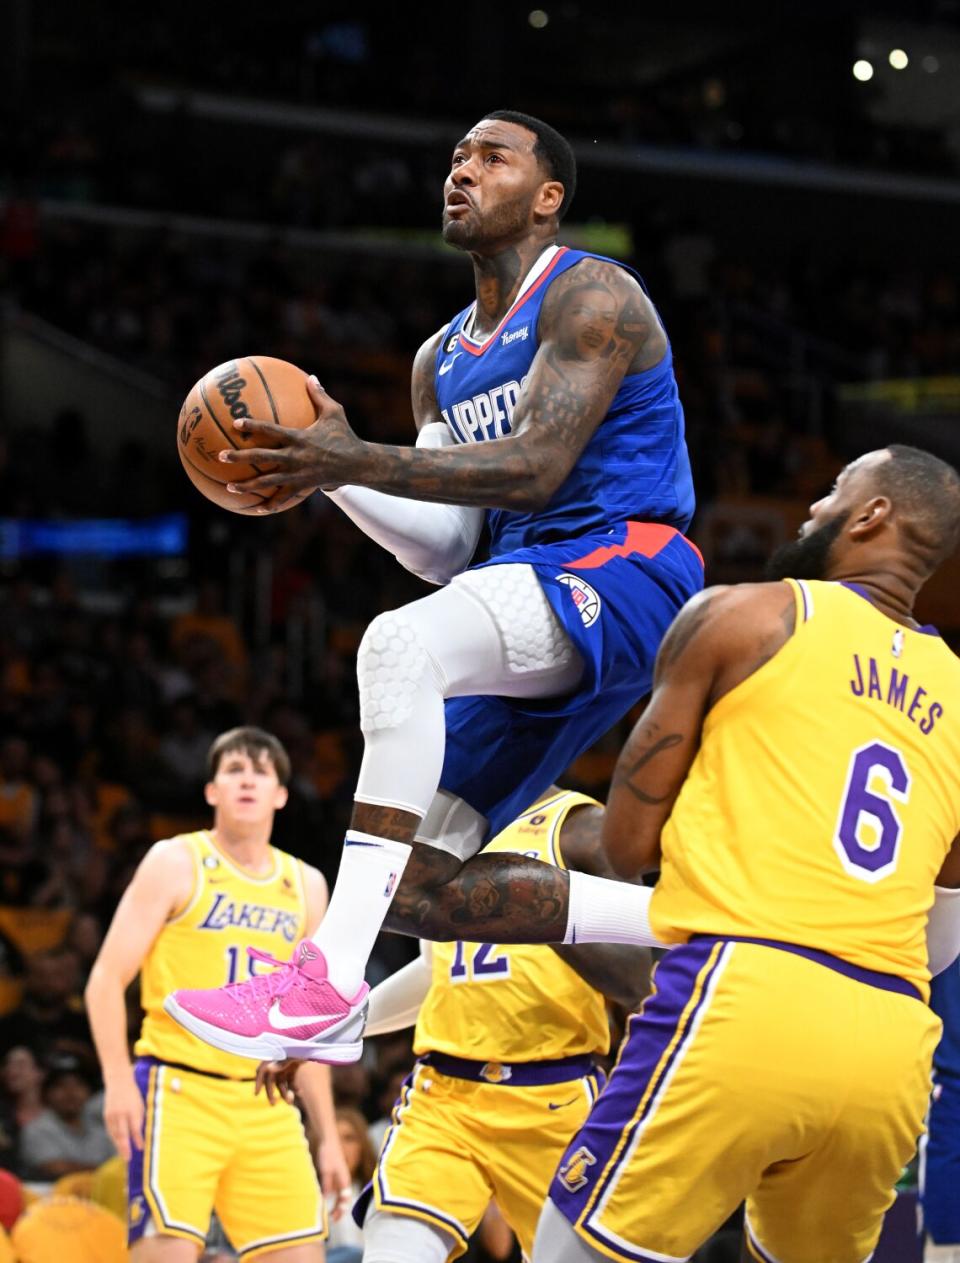 Clippers guard John Wall drives through the Lakers defense to score.